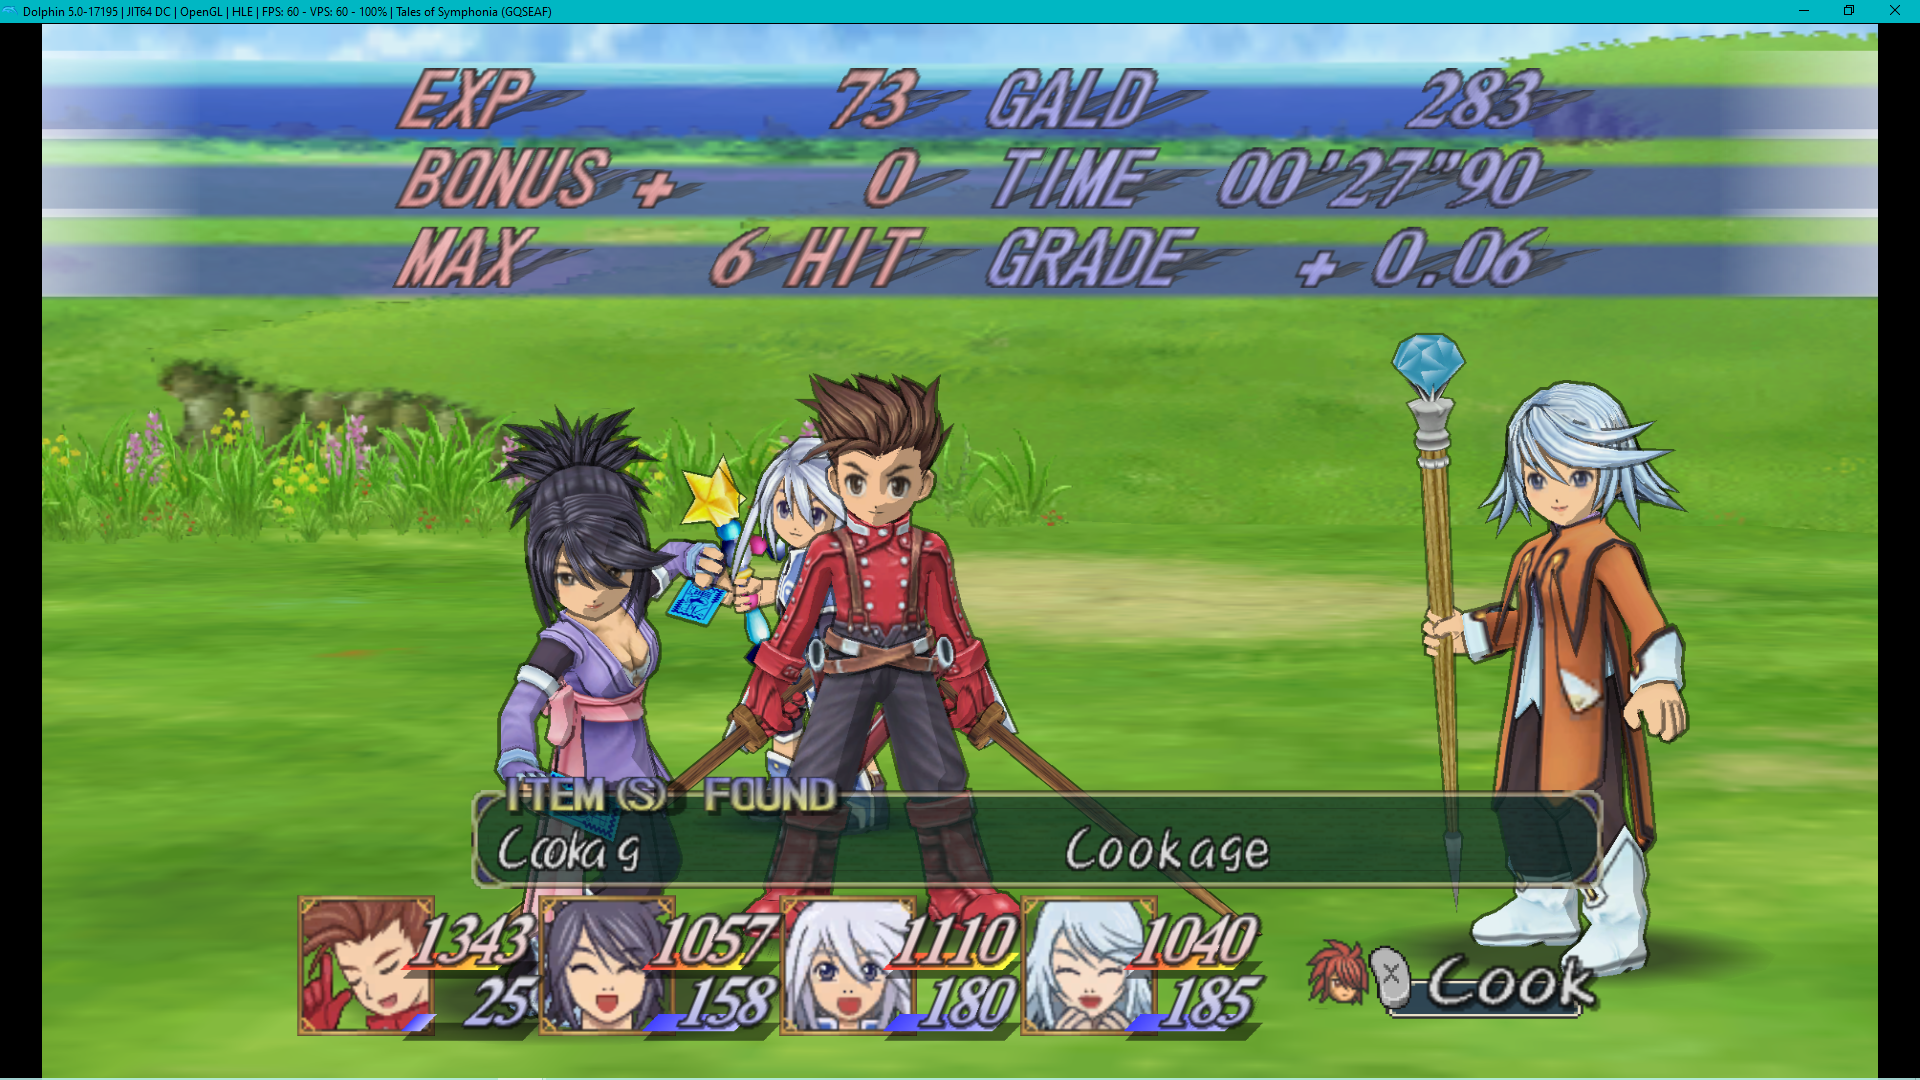 Tales of Symphonia Text Corruption/Glitchiness After Battles.